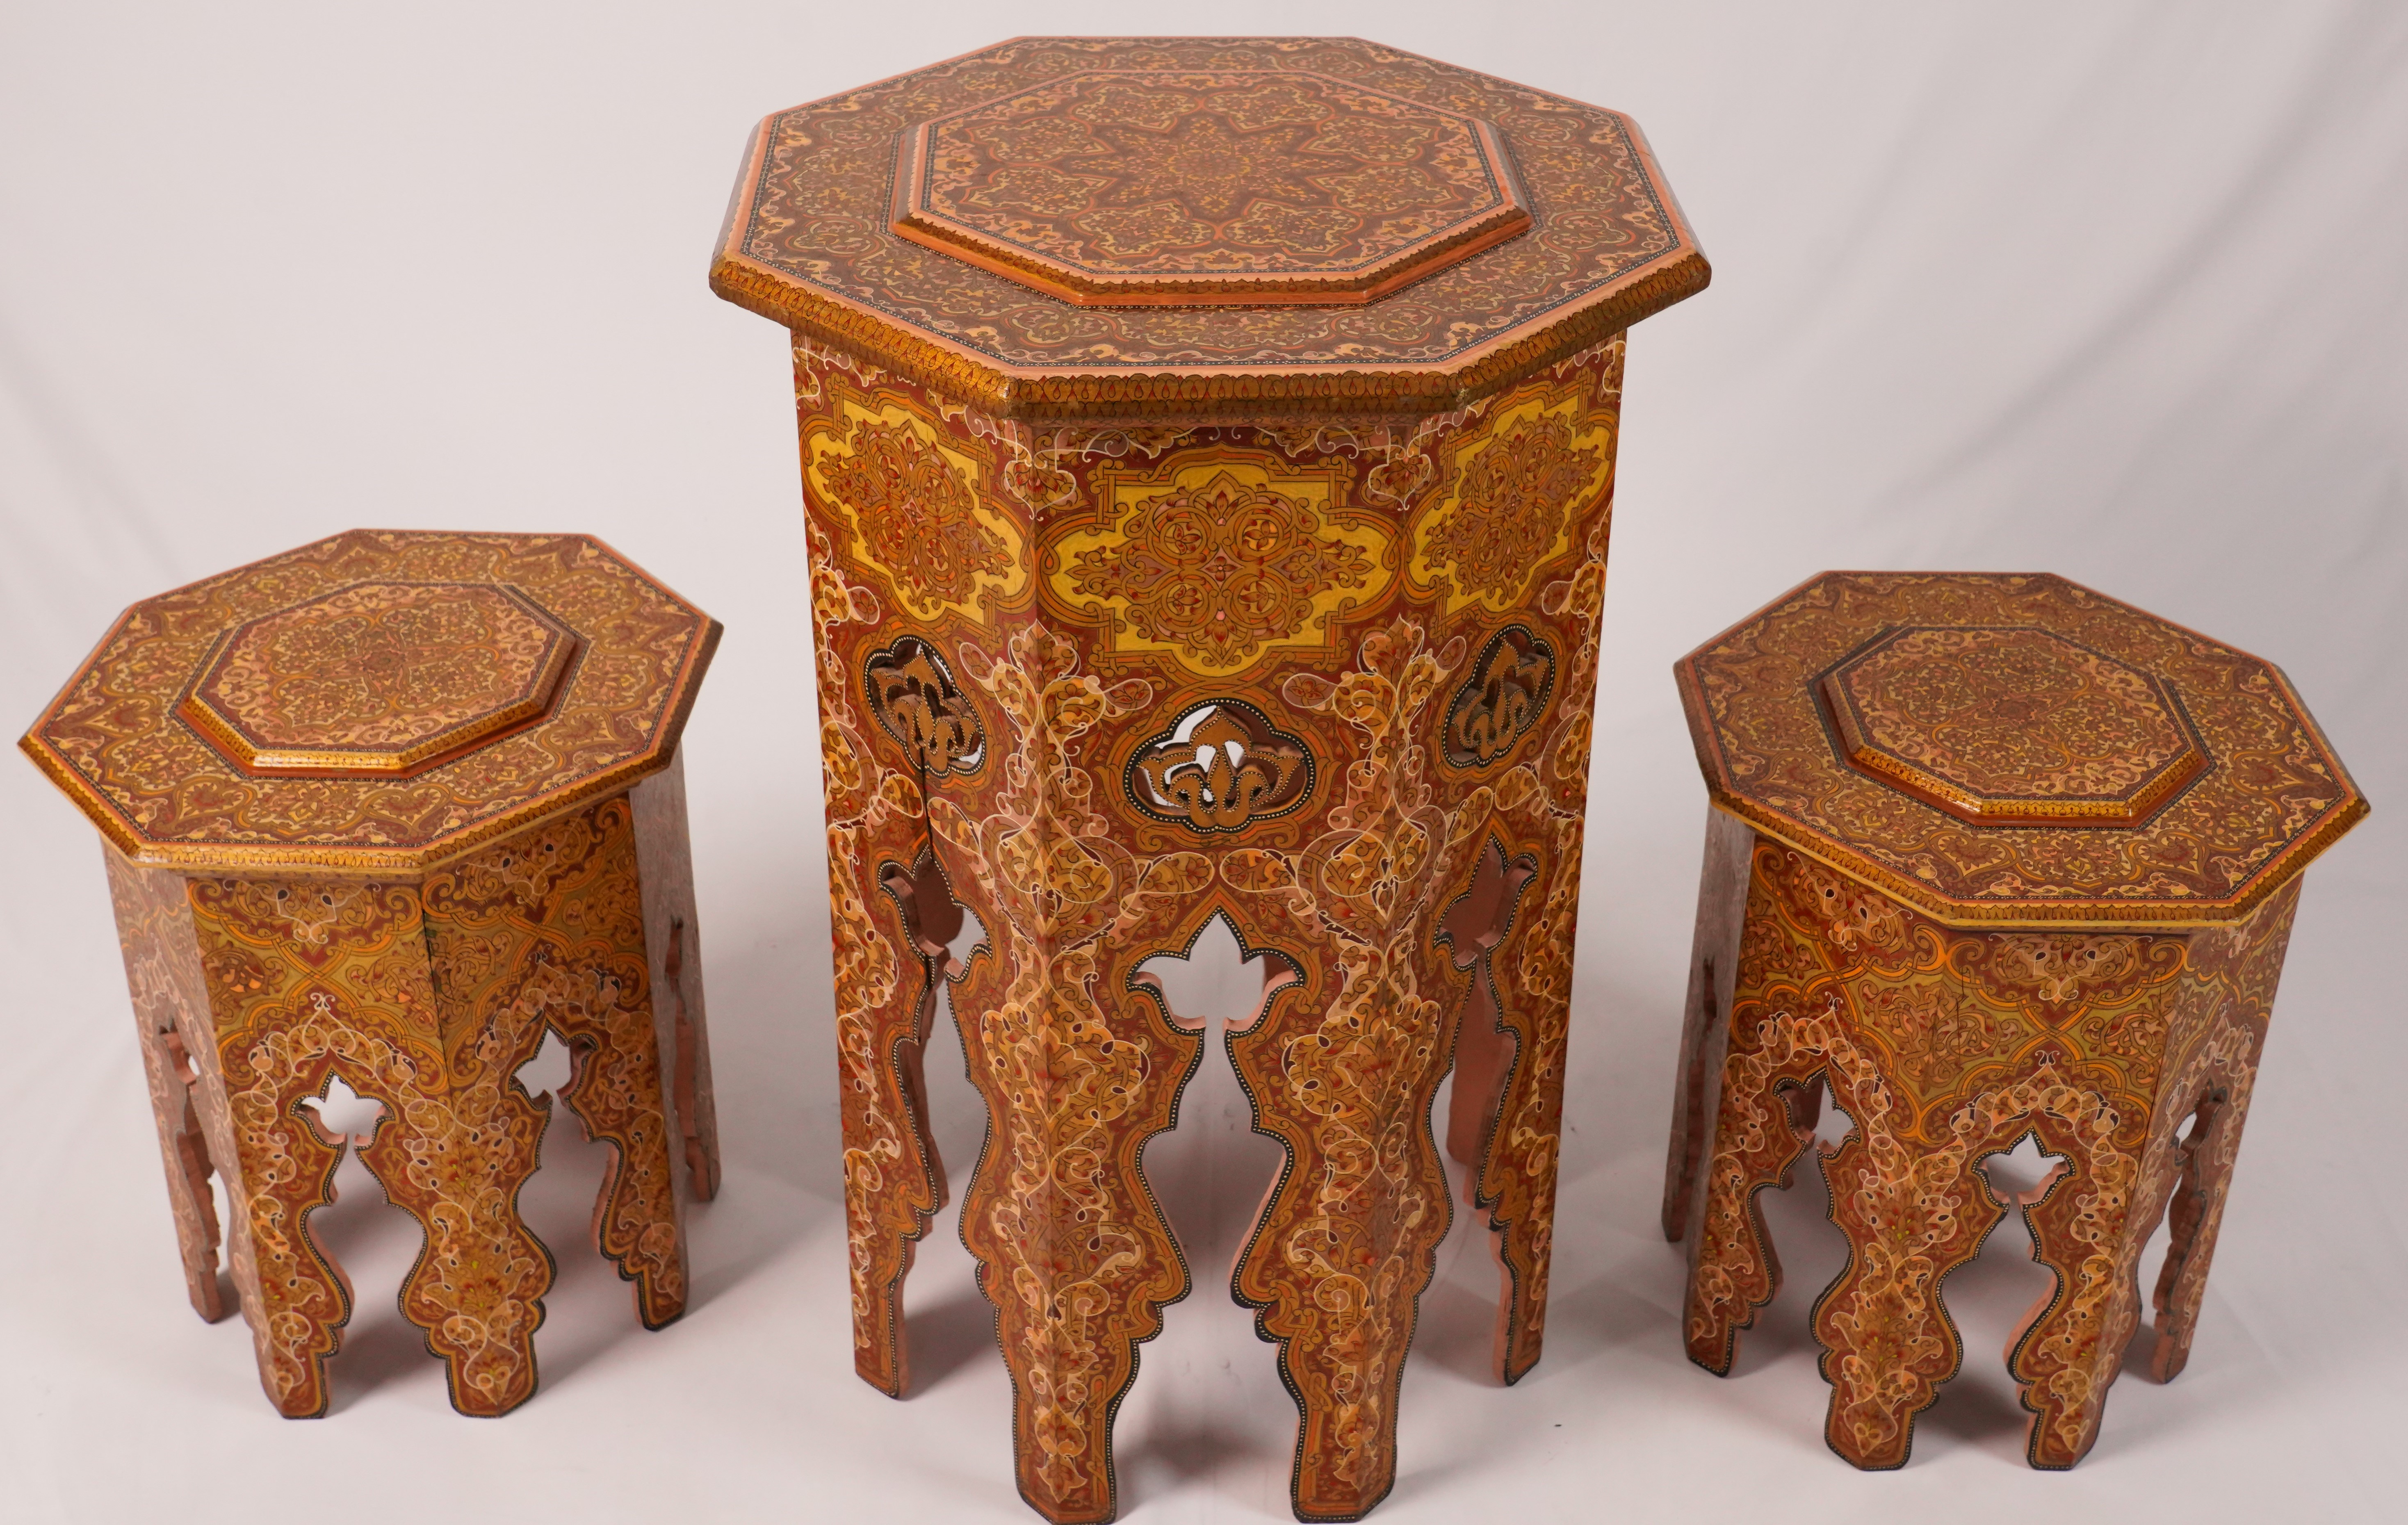 The national painting of khon takhta. A table and two stools